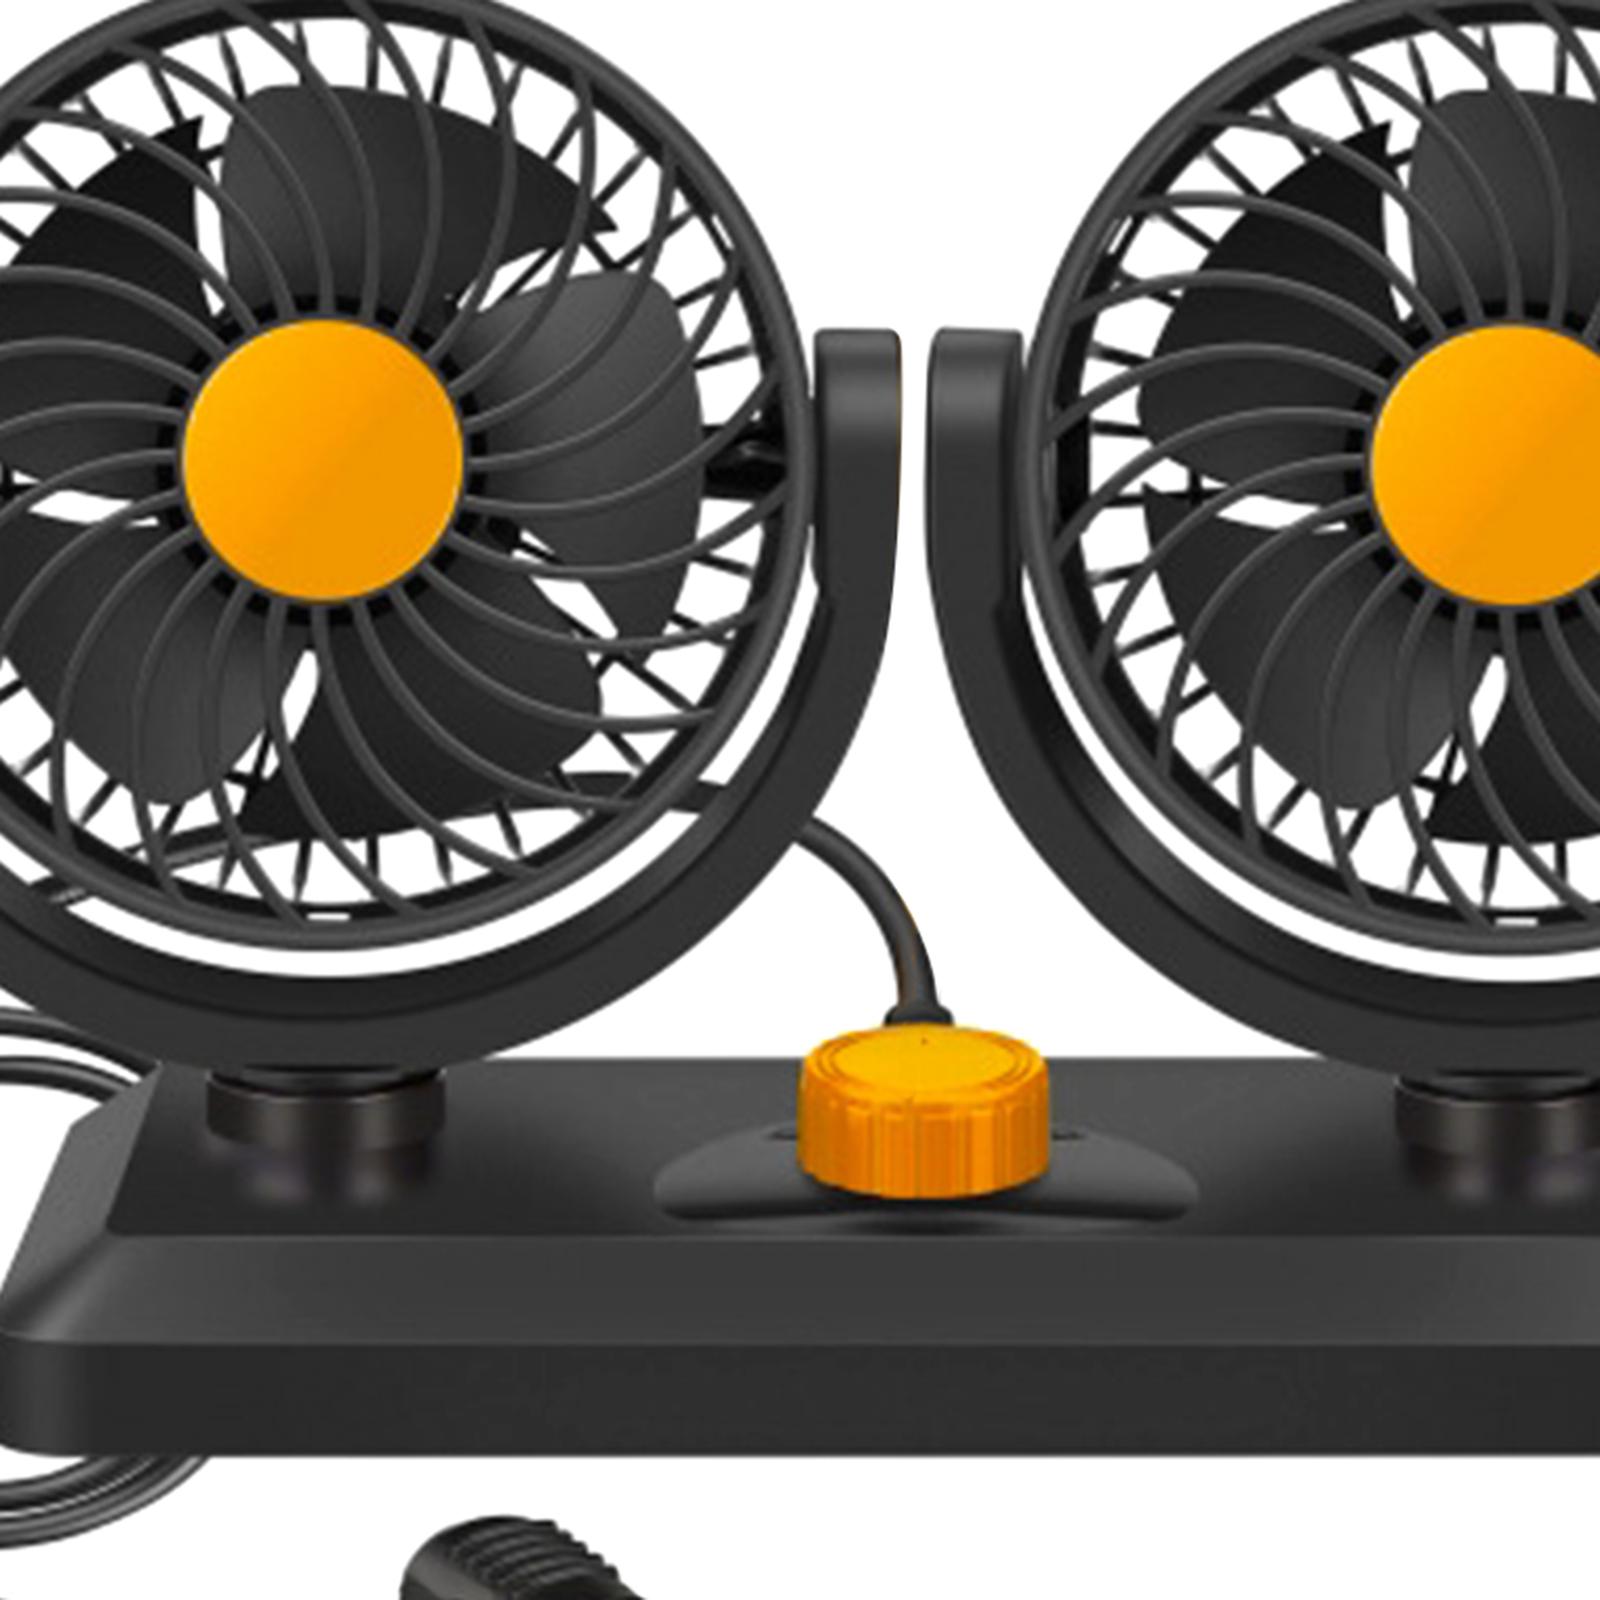 Dual Head Car Fan Durable Devices Strong Wind Fan for Dashboard RV Home 24V